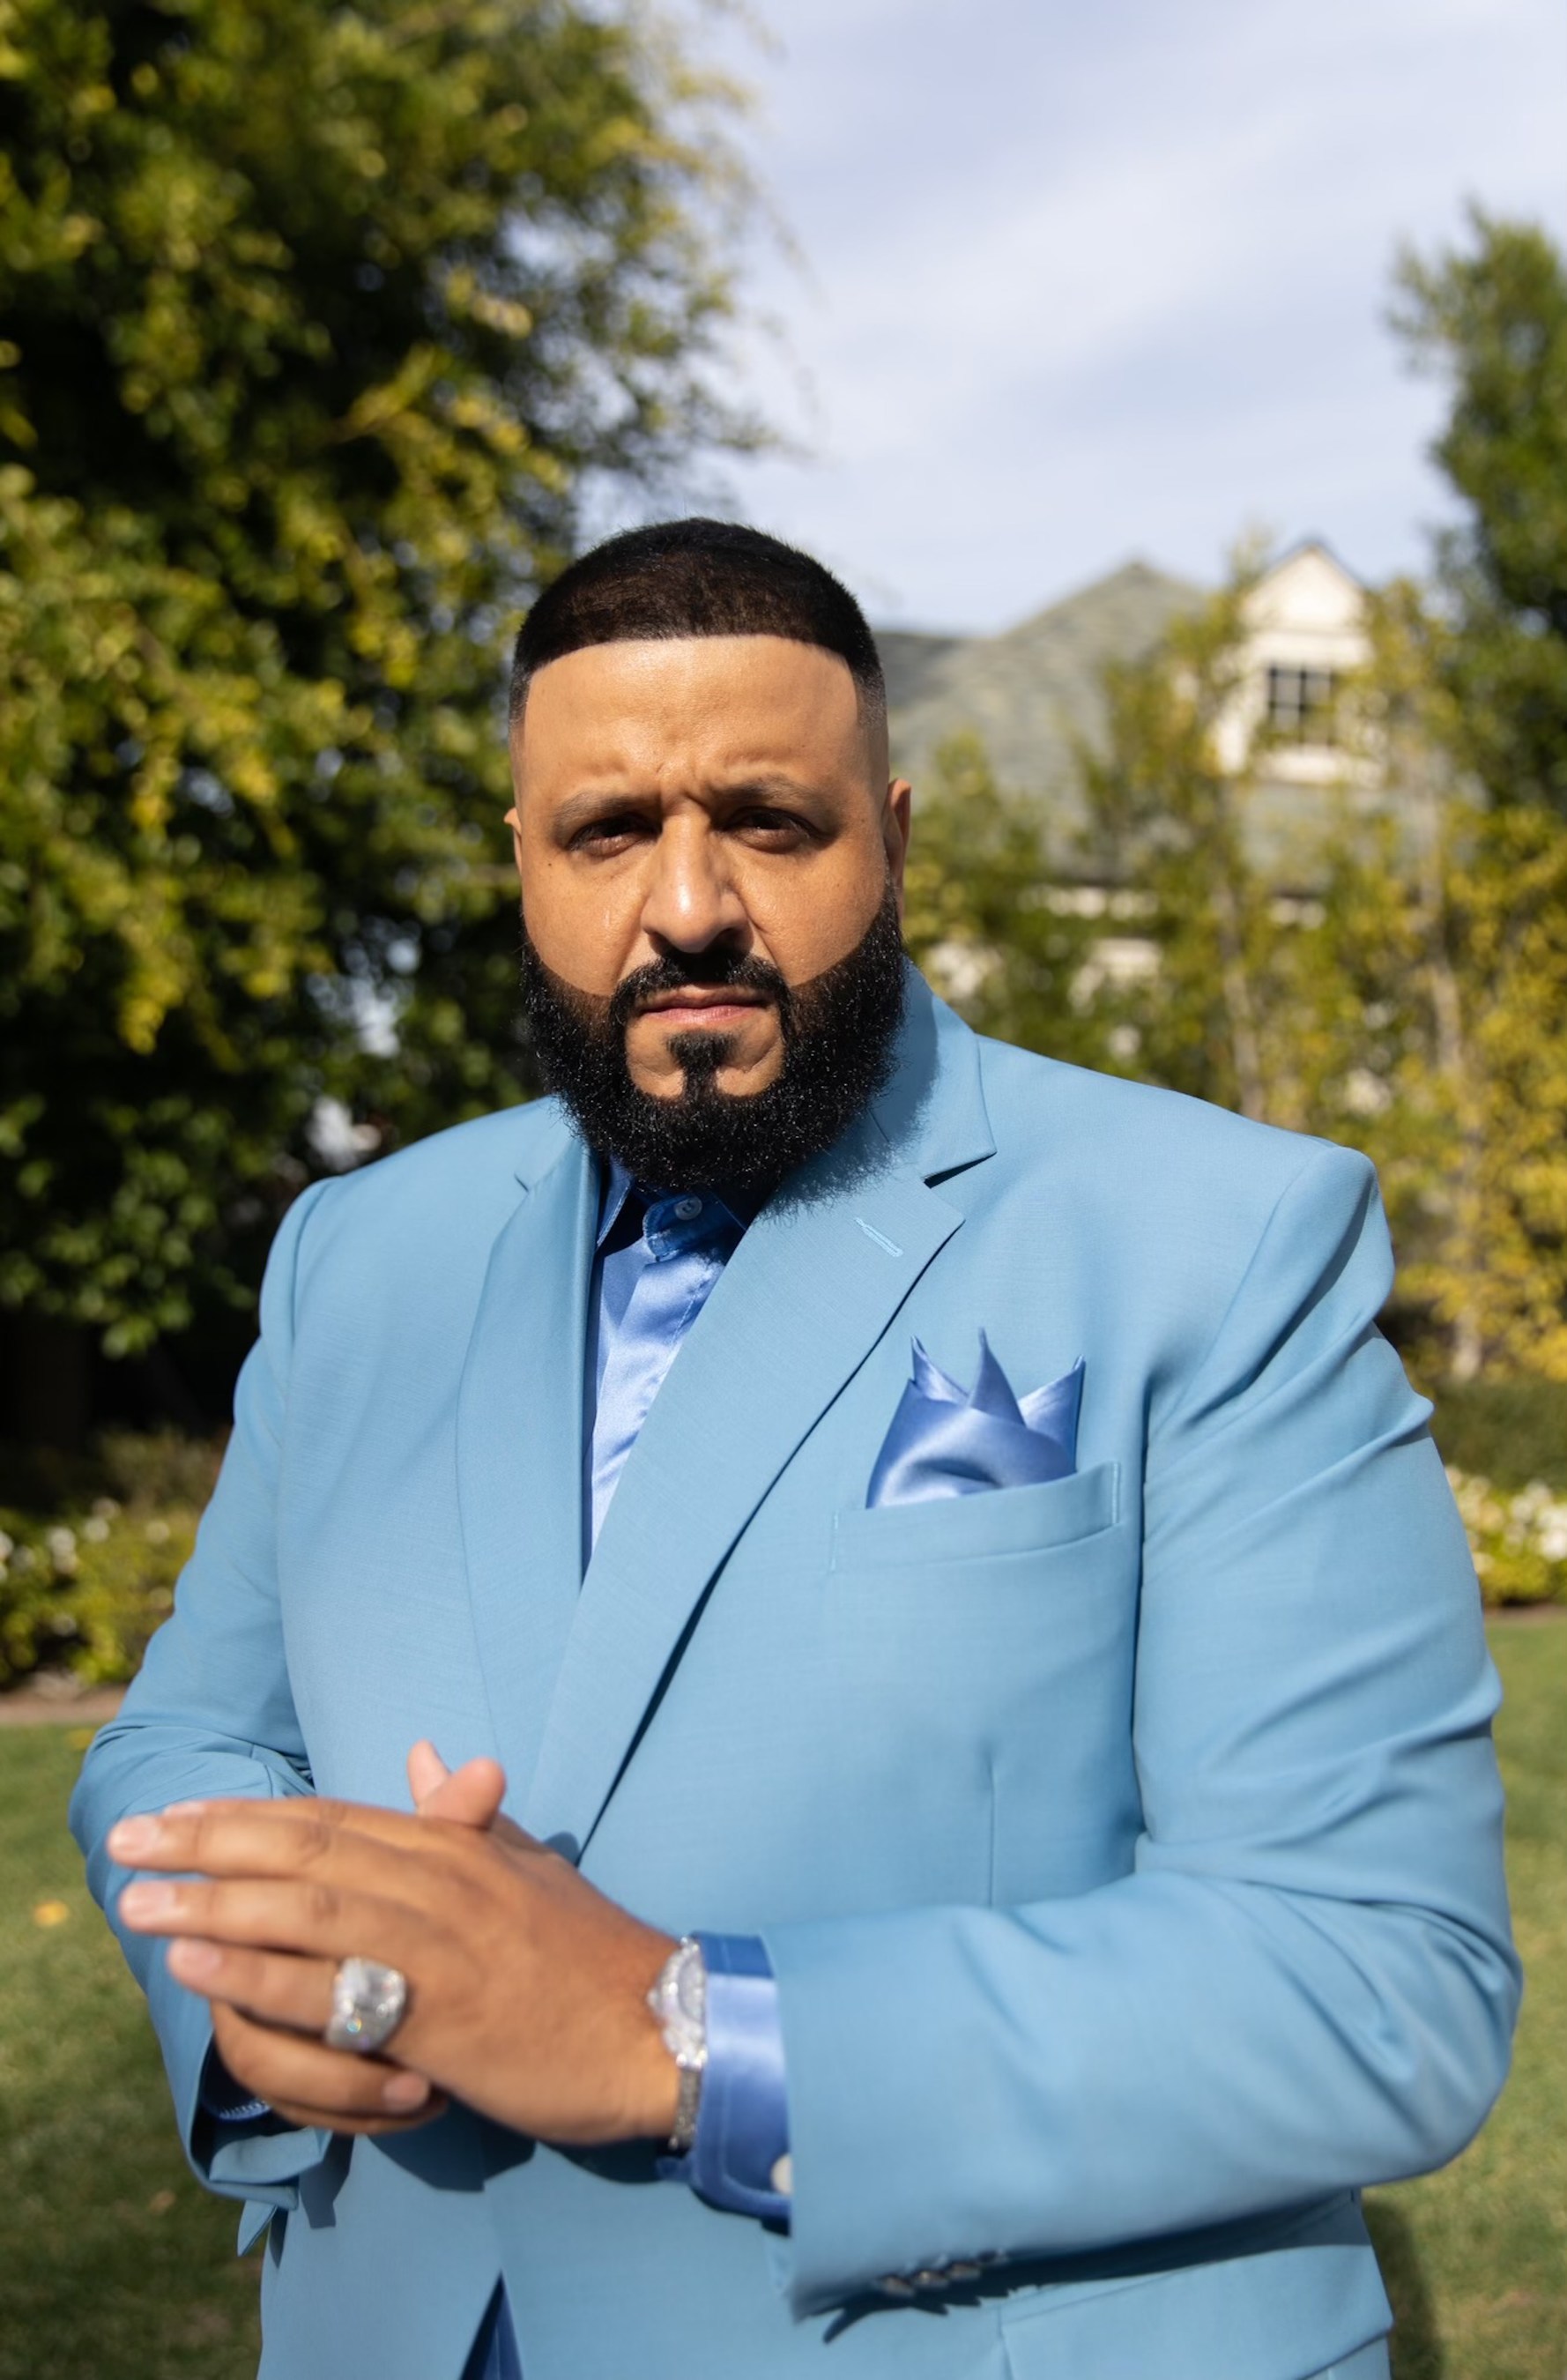 DJ Khaled Announces "Another One" with his Entrance into The CBD Lifestyle  & Wellness Sector